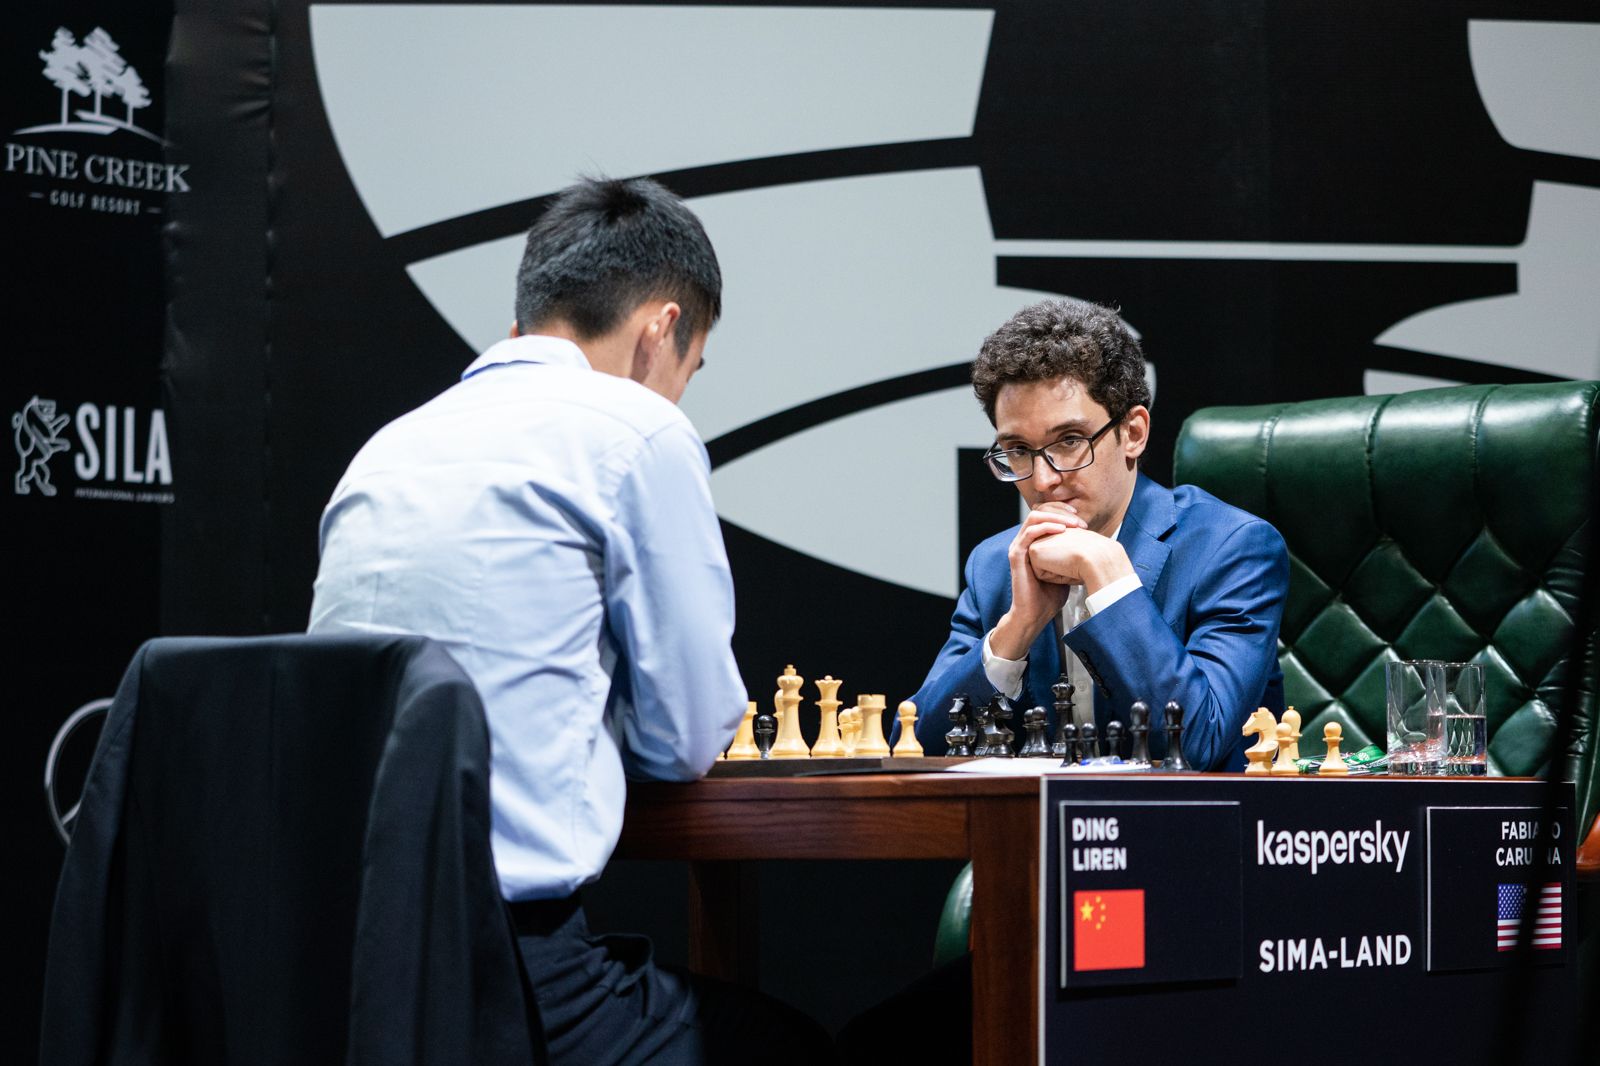 Fide Chess Candidates 2020: Caruana climbs to joint lead, Liren suffers  second straight defeat